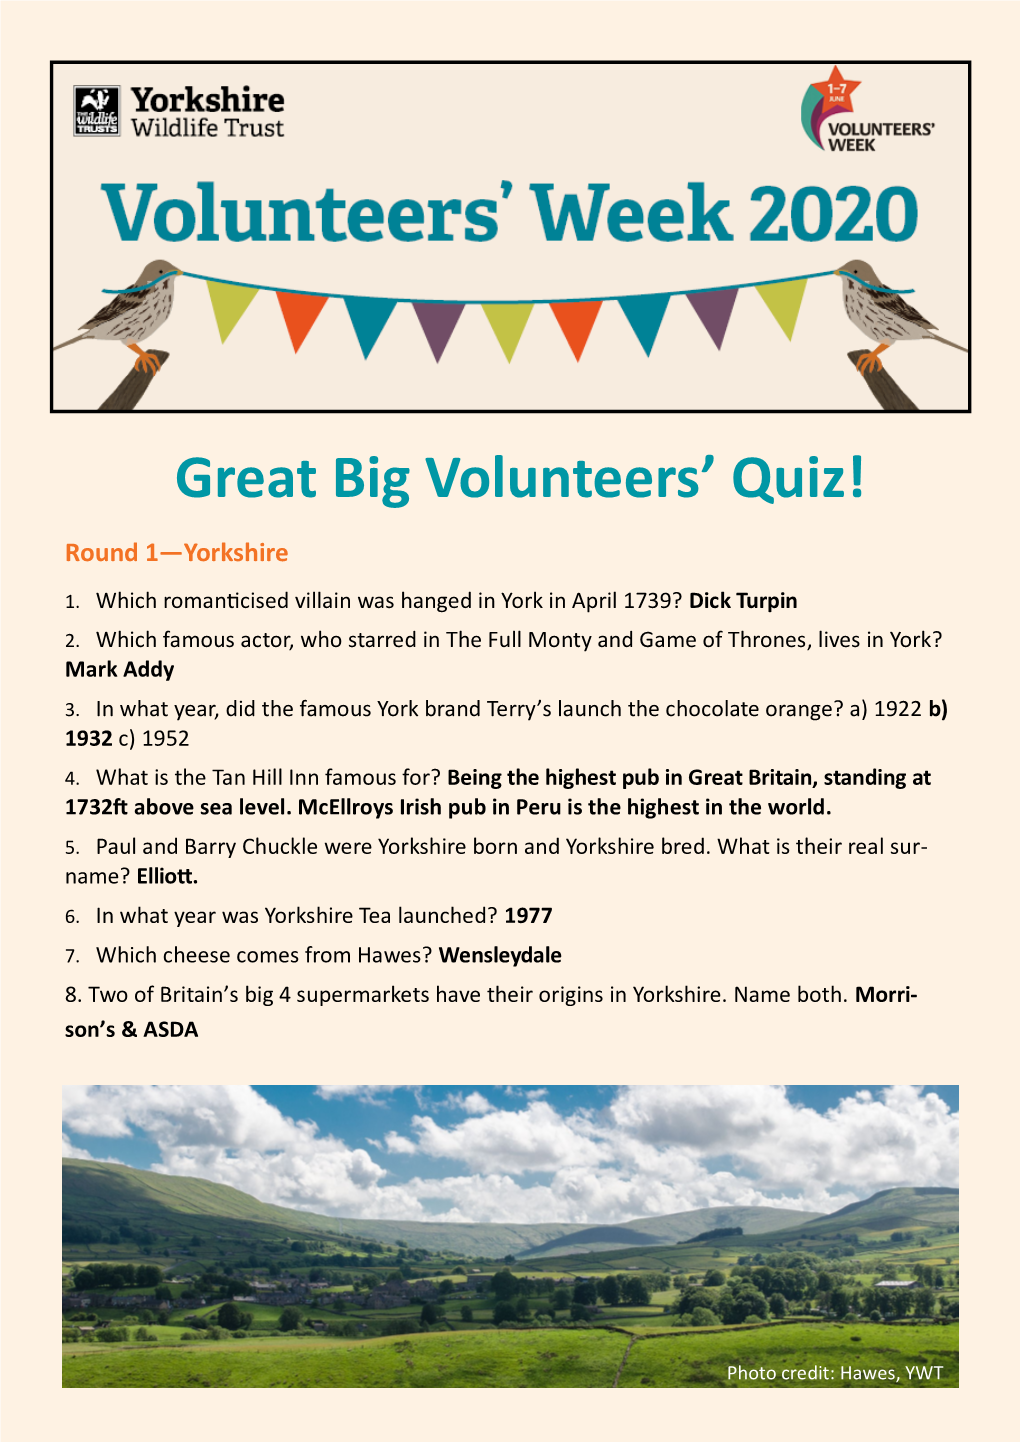 The Great Big Volunteers' Quiz with Answers